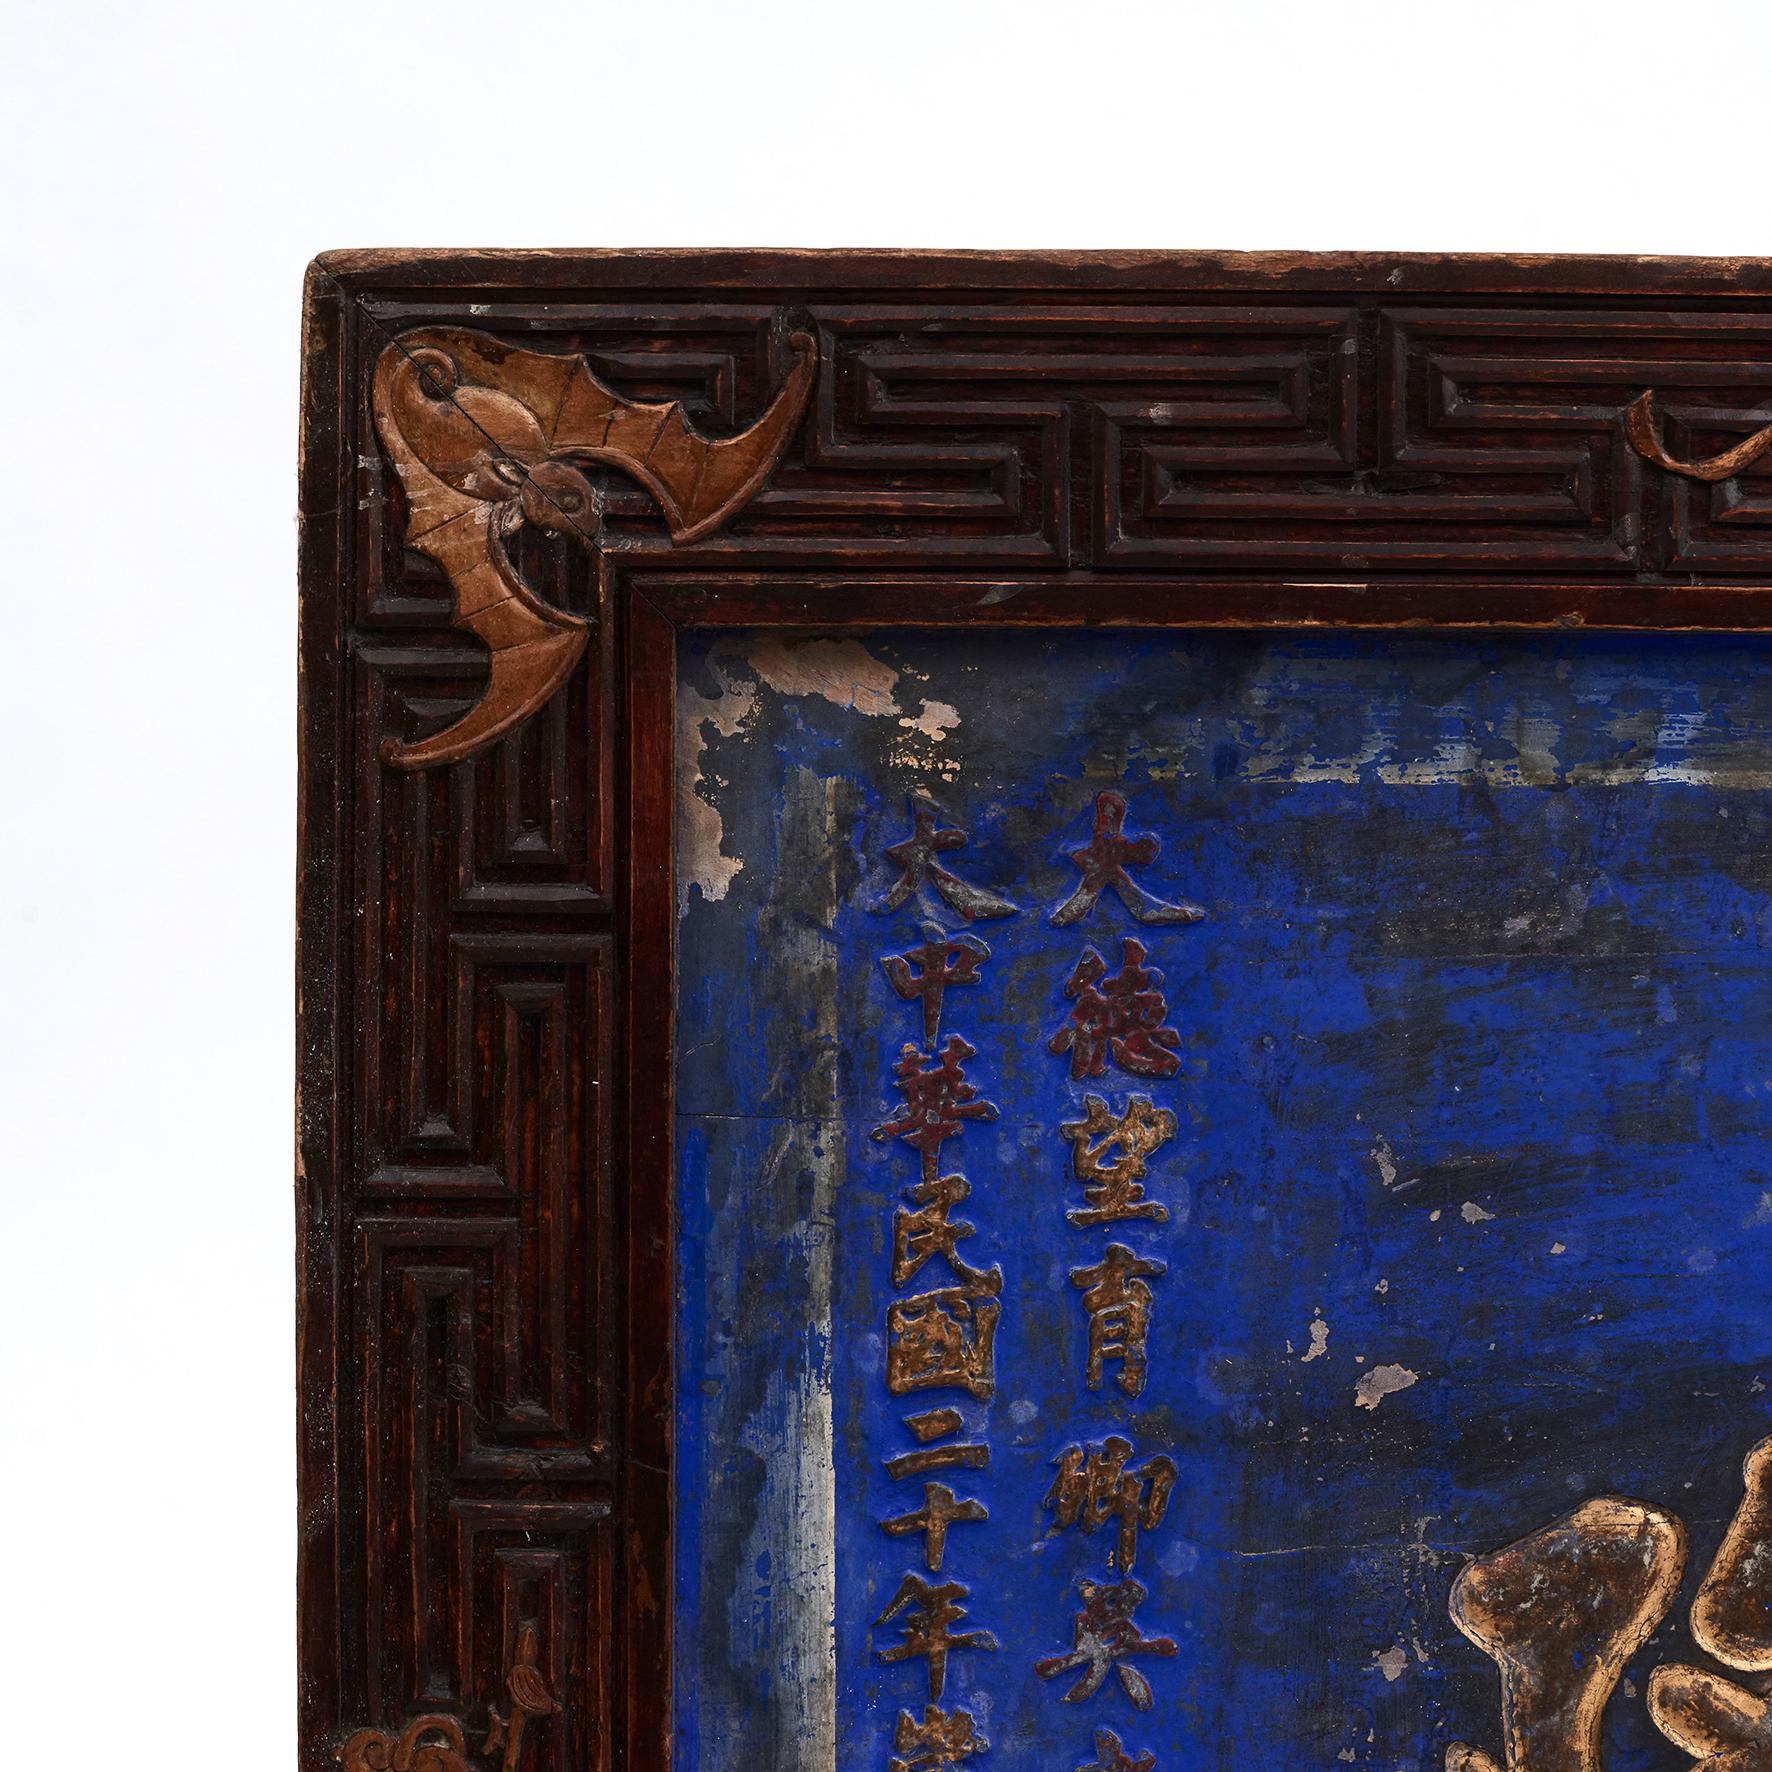 A large Chinese Qing Dynasty period blue lacqured signboard with calligraphy.
The wood carved signboard showcases a frame adorned with carved á la grecque border with vases and bats in the corners. The panel is lacquered with a stunning blue color